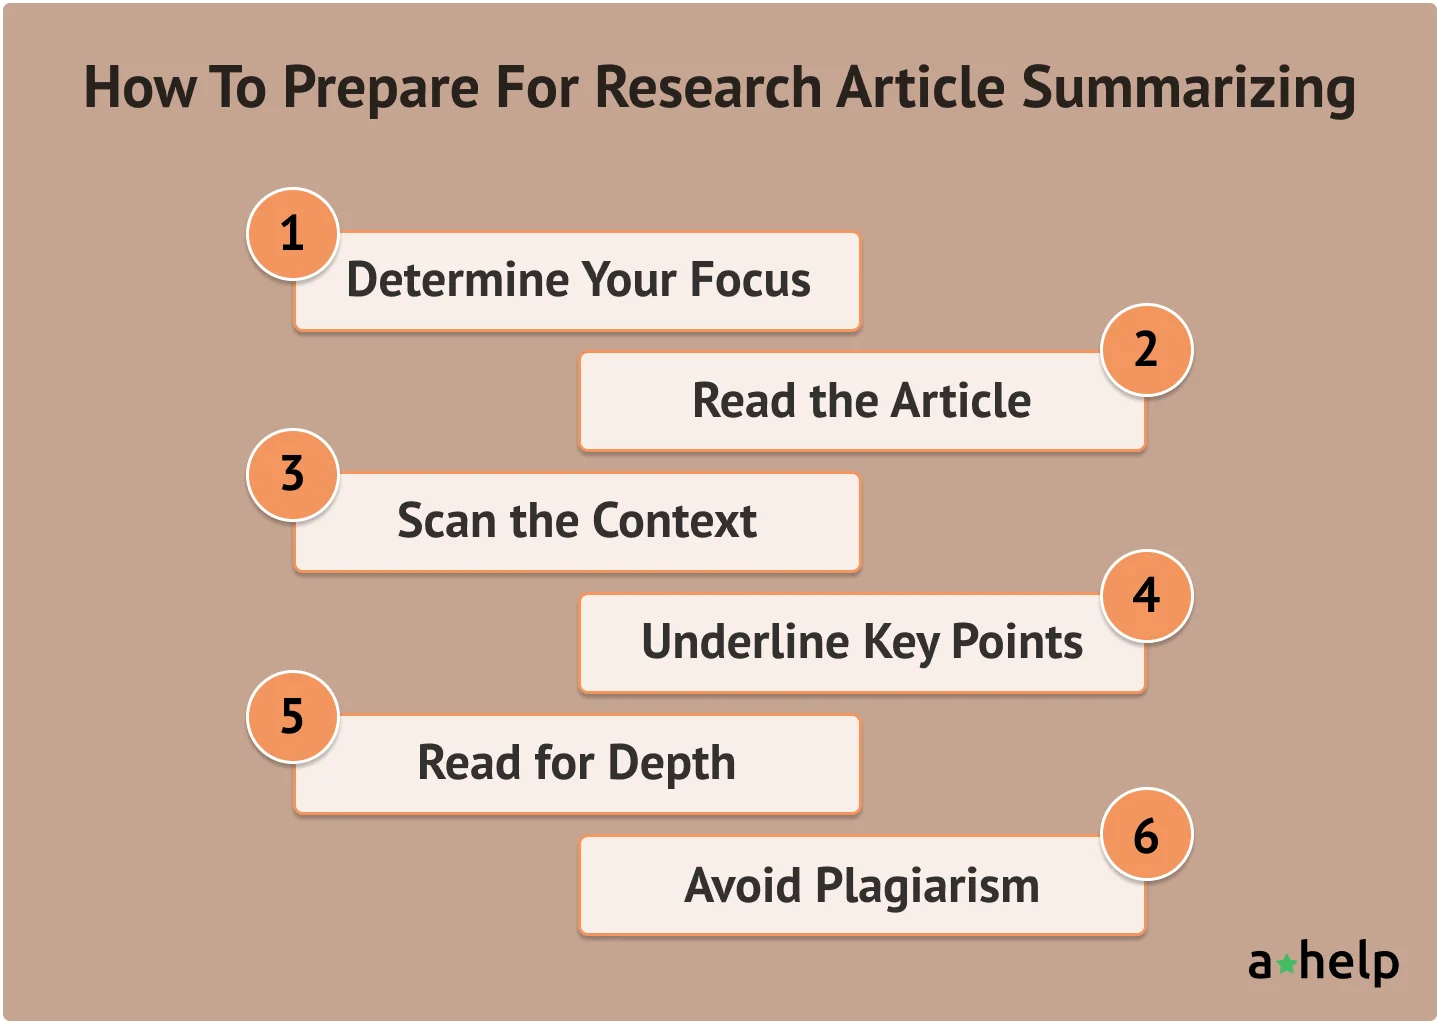 How To Prepare For Research Article Summarizing